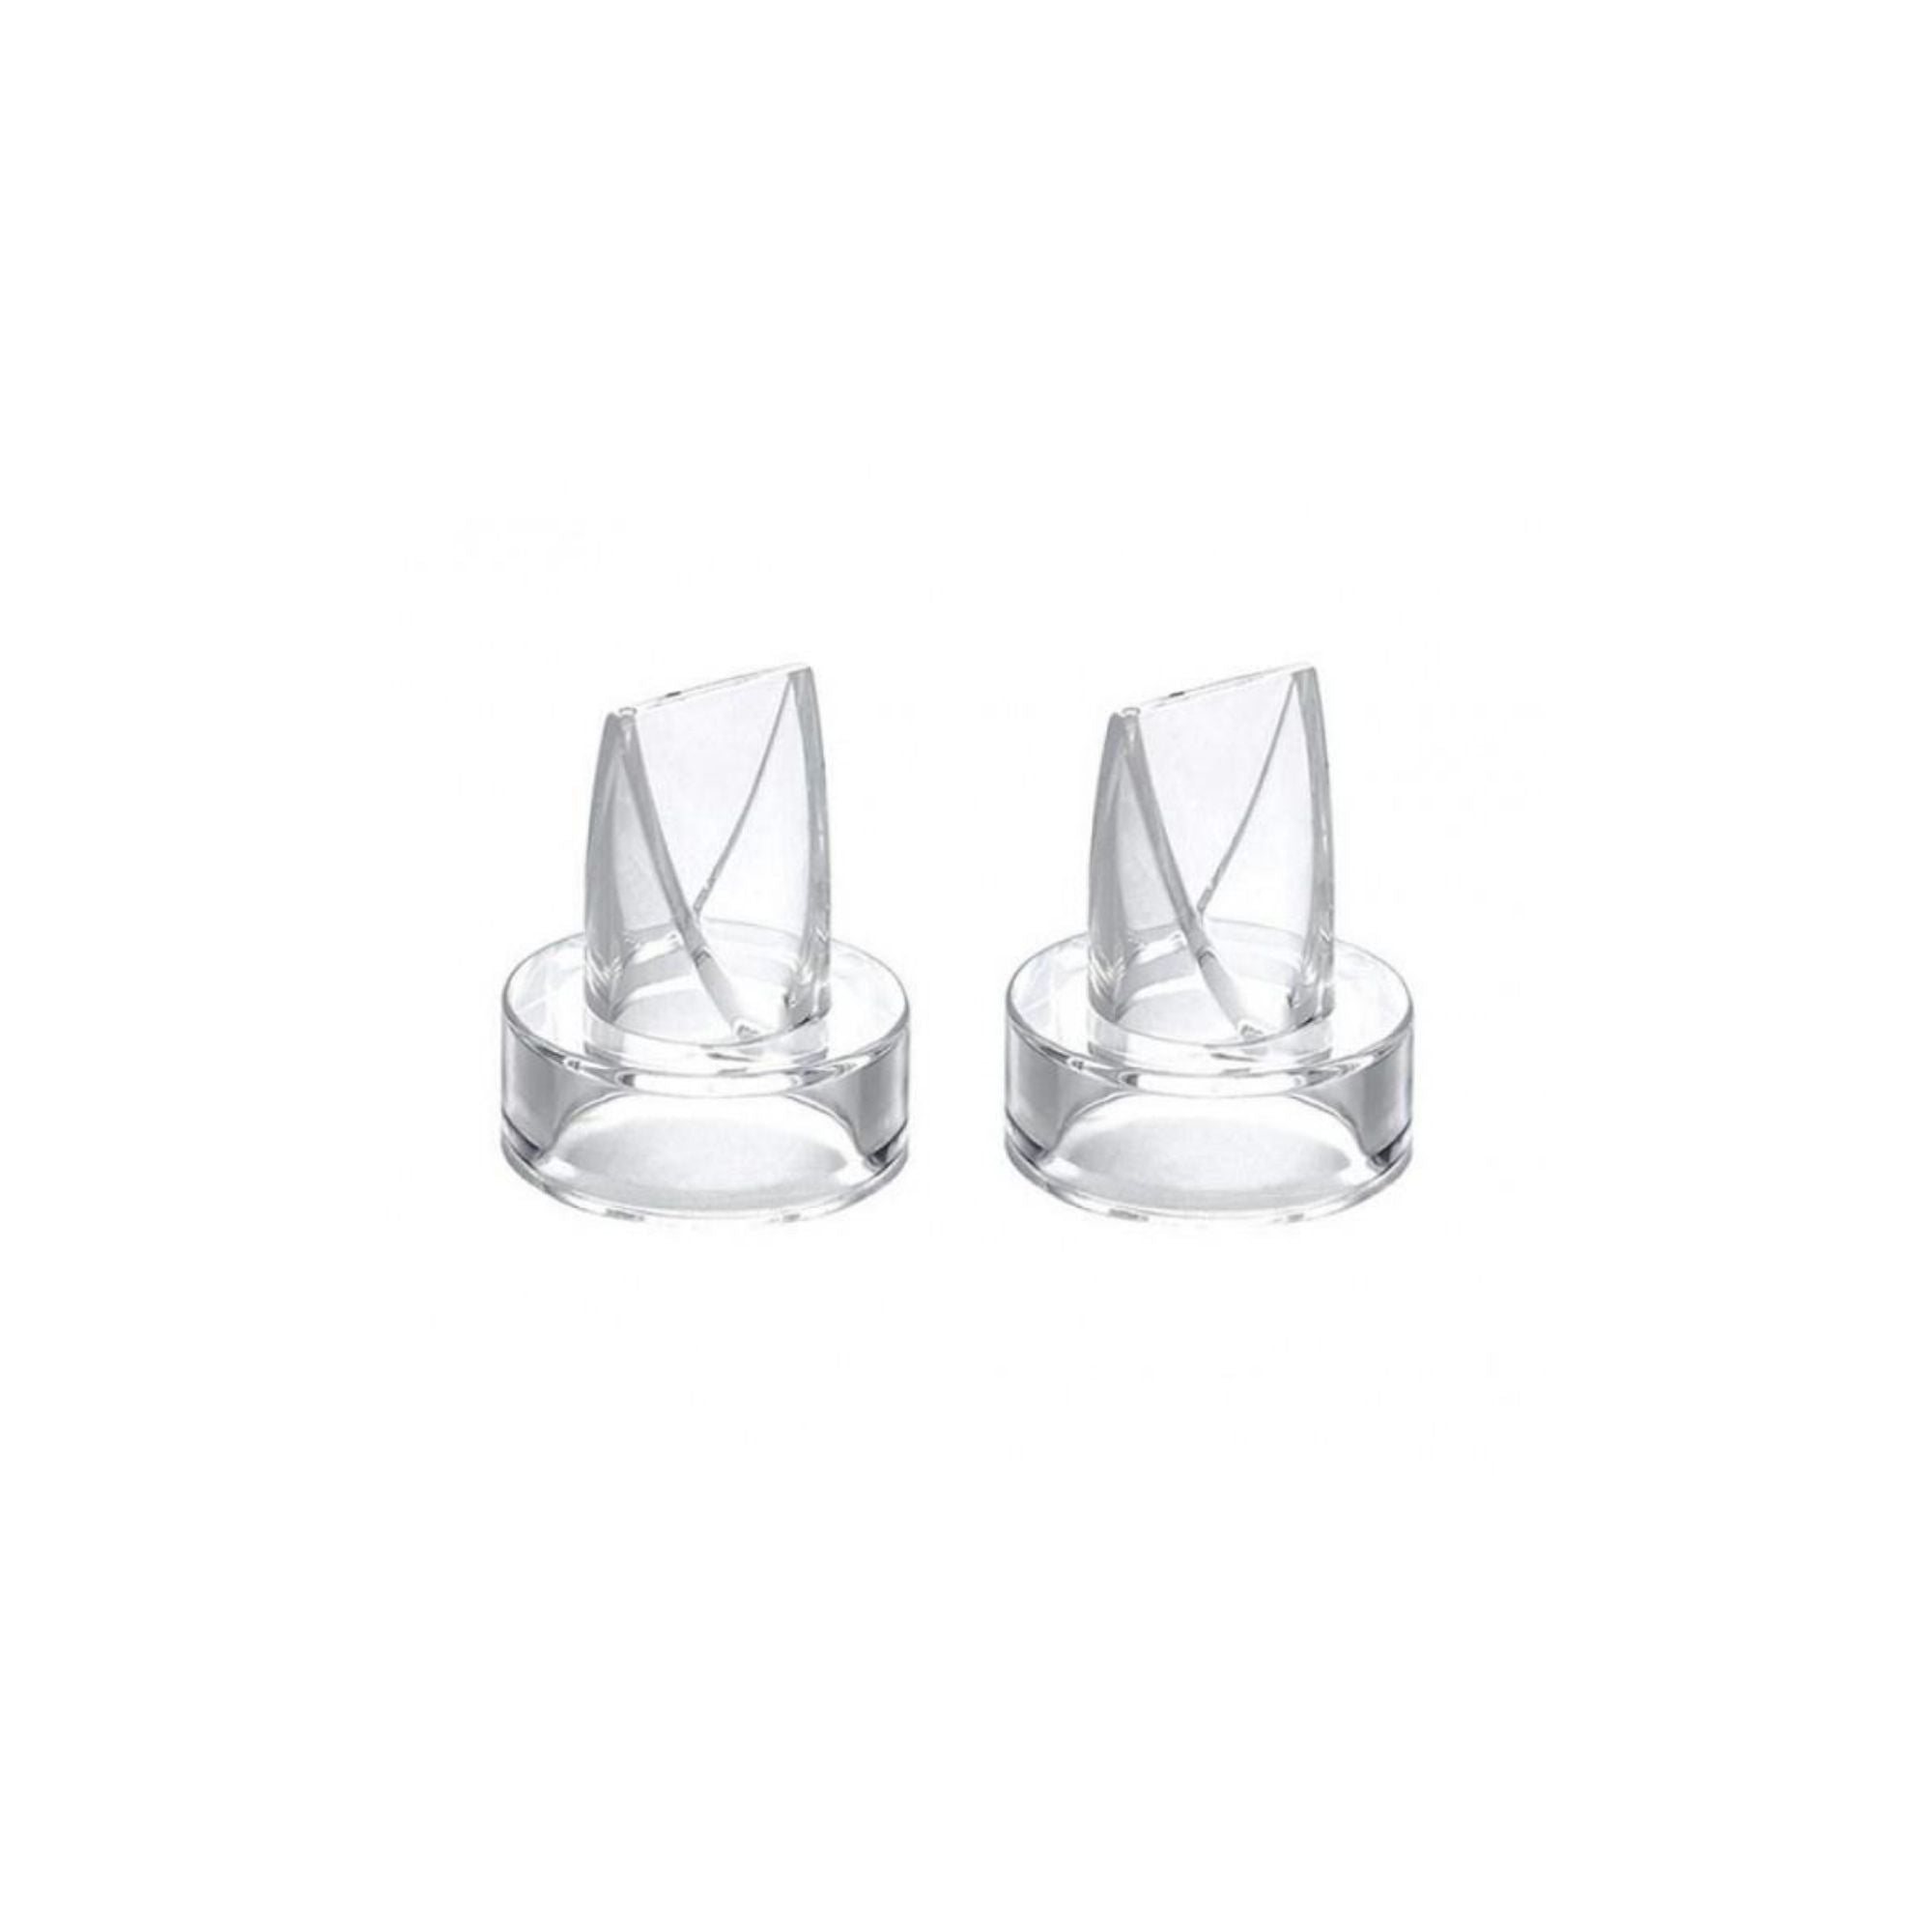 Spectra Handsfree Shield Cups (Pack of 2)